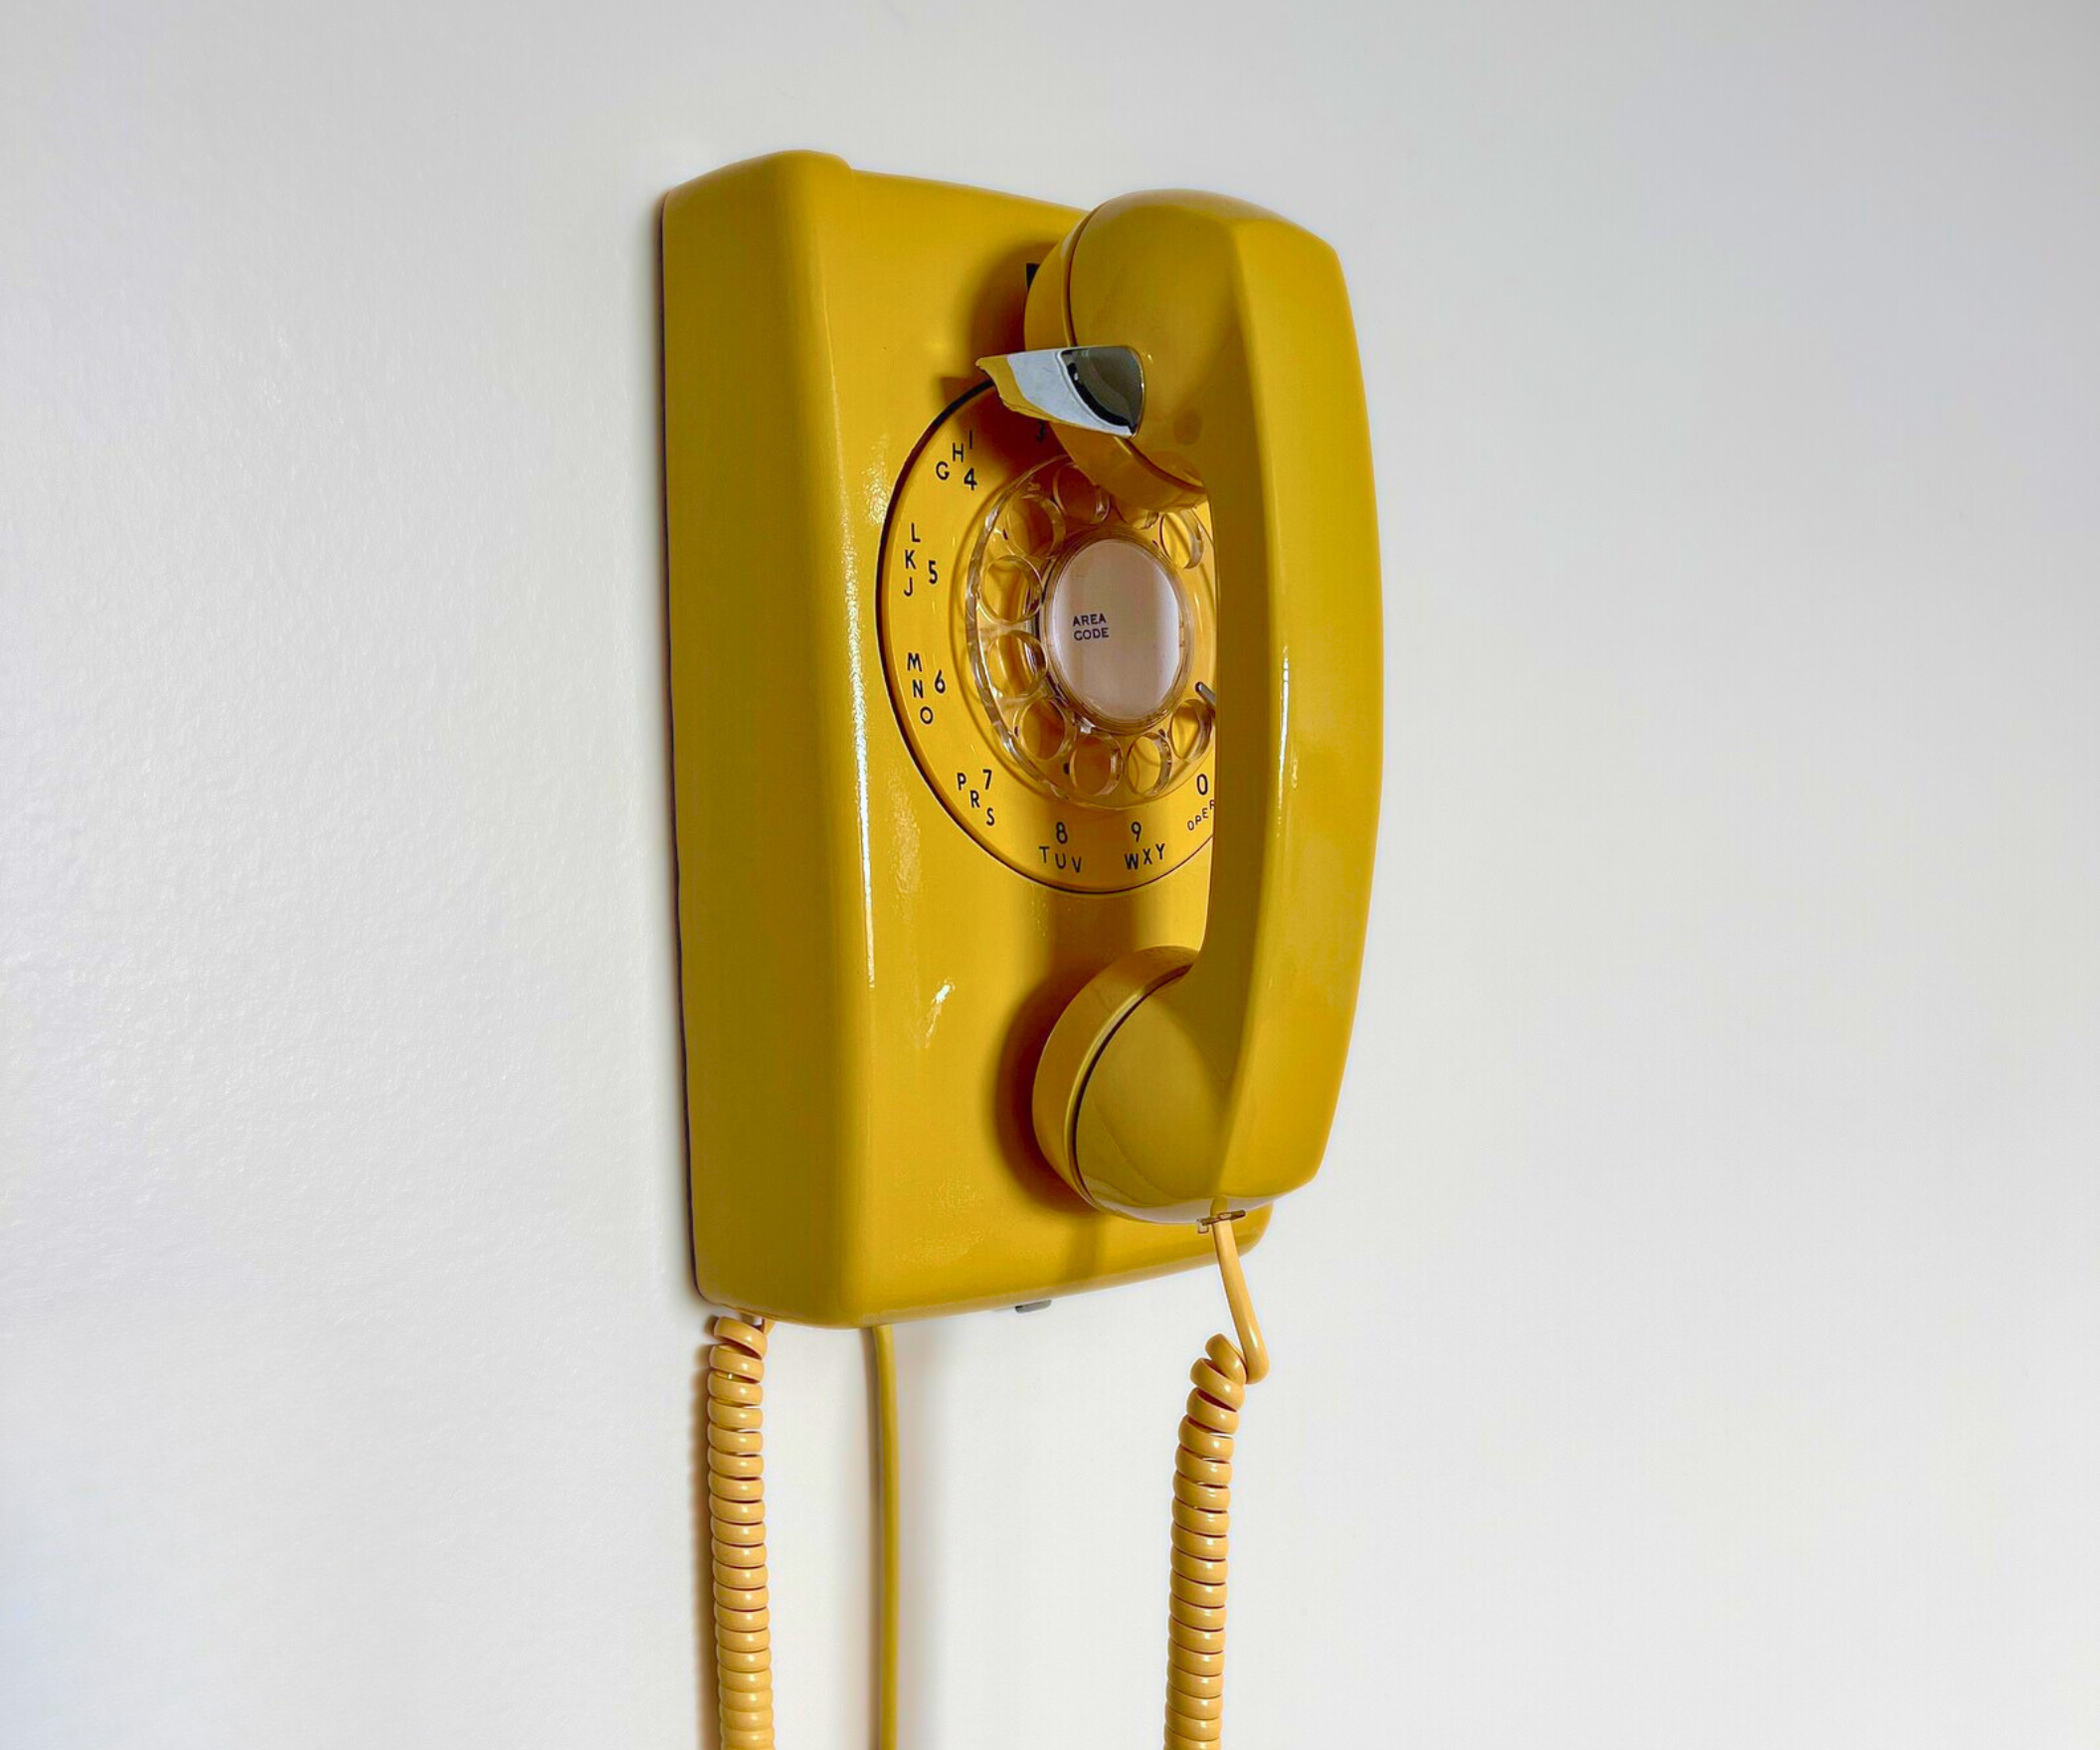 Vintage Rotary Phone That Plays Your Custom Audio Messages